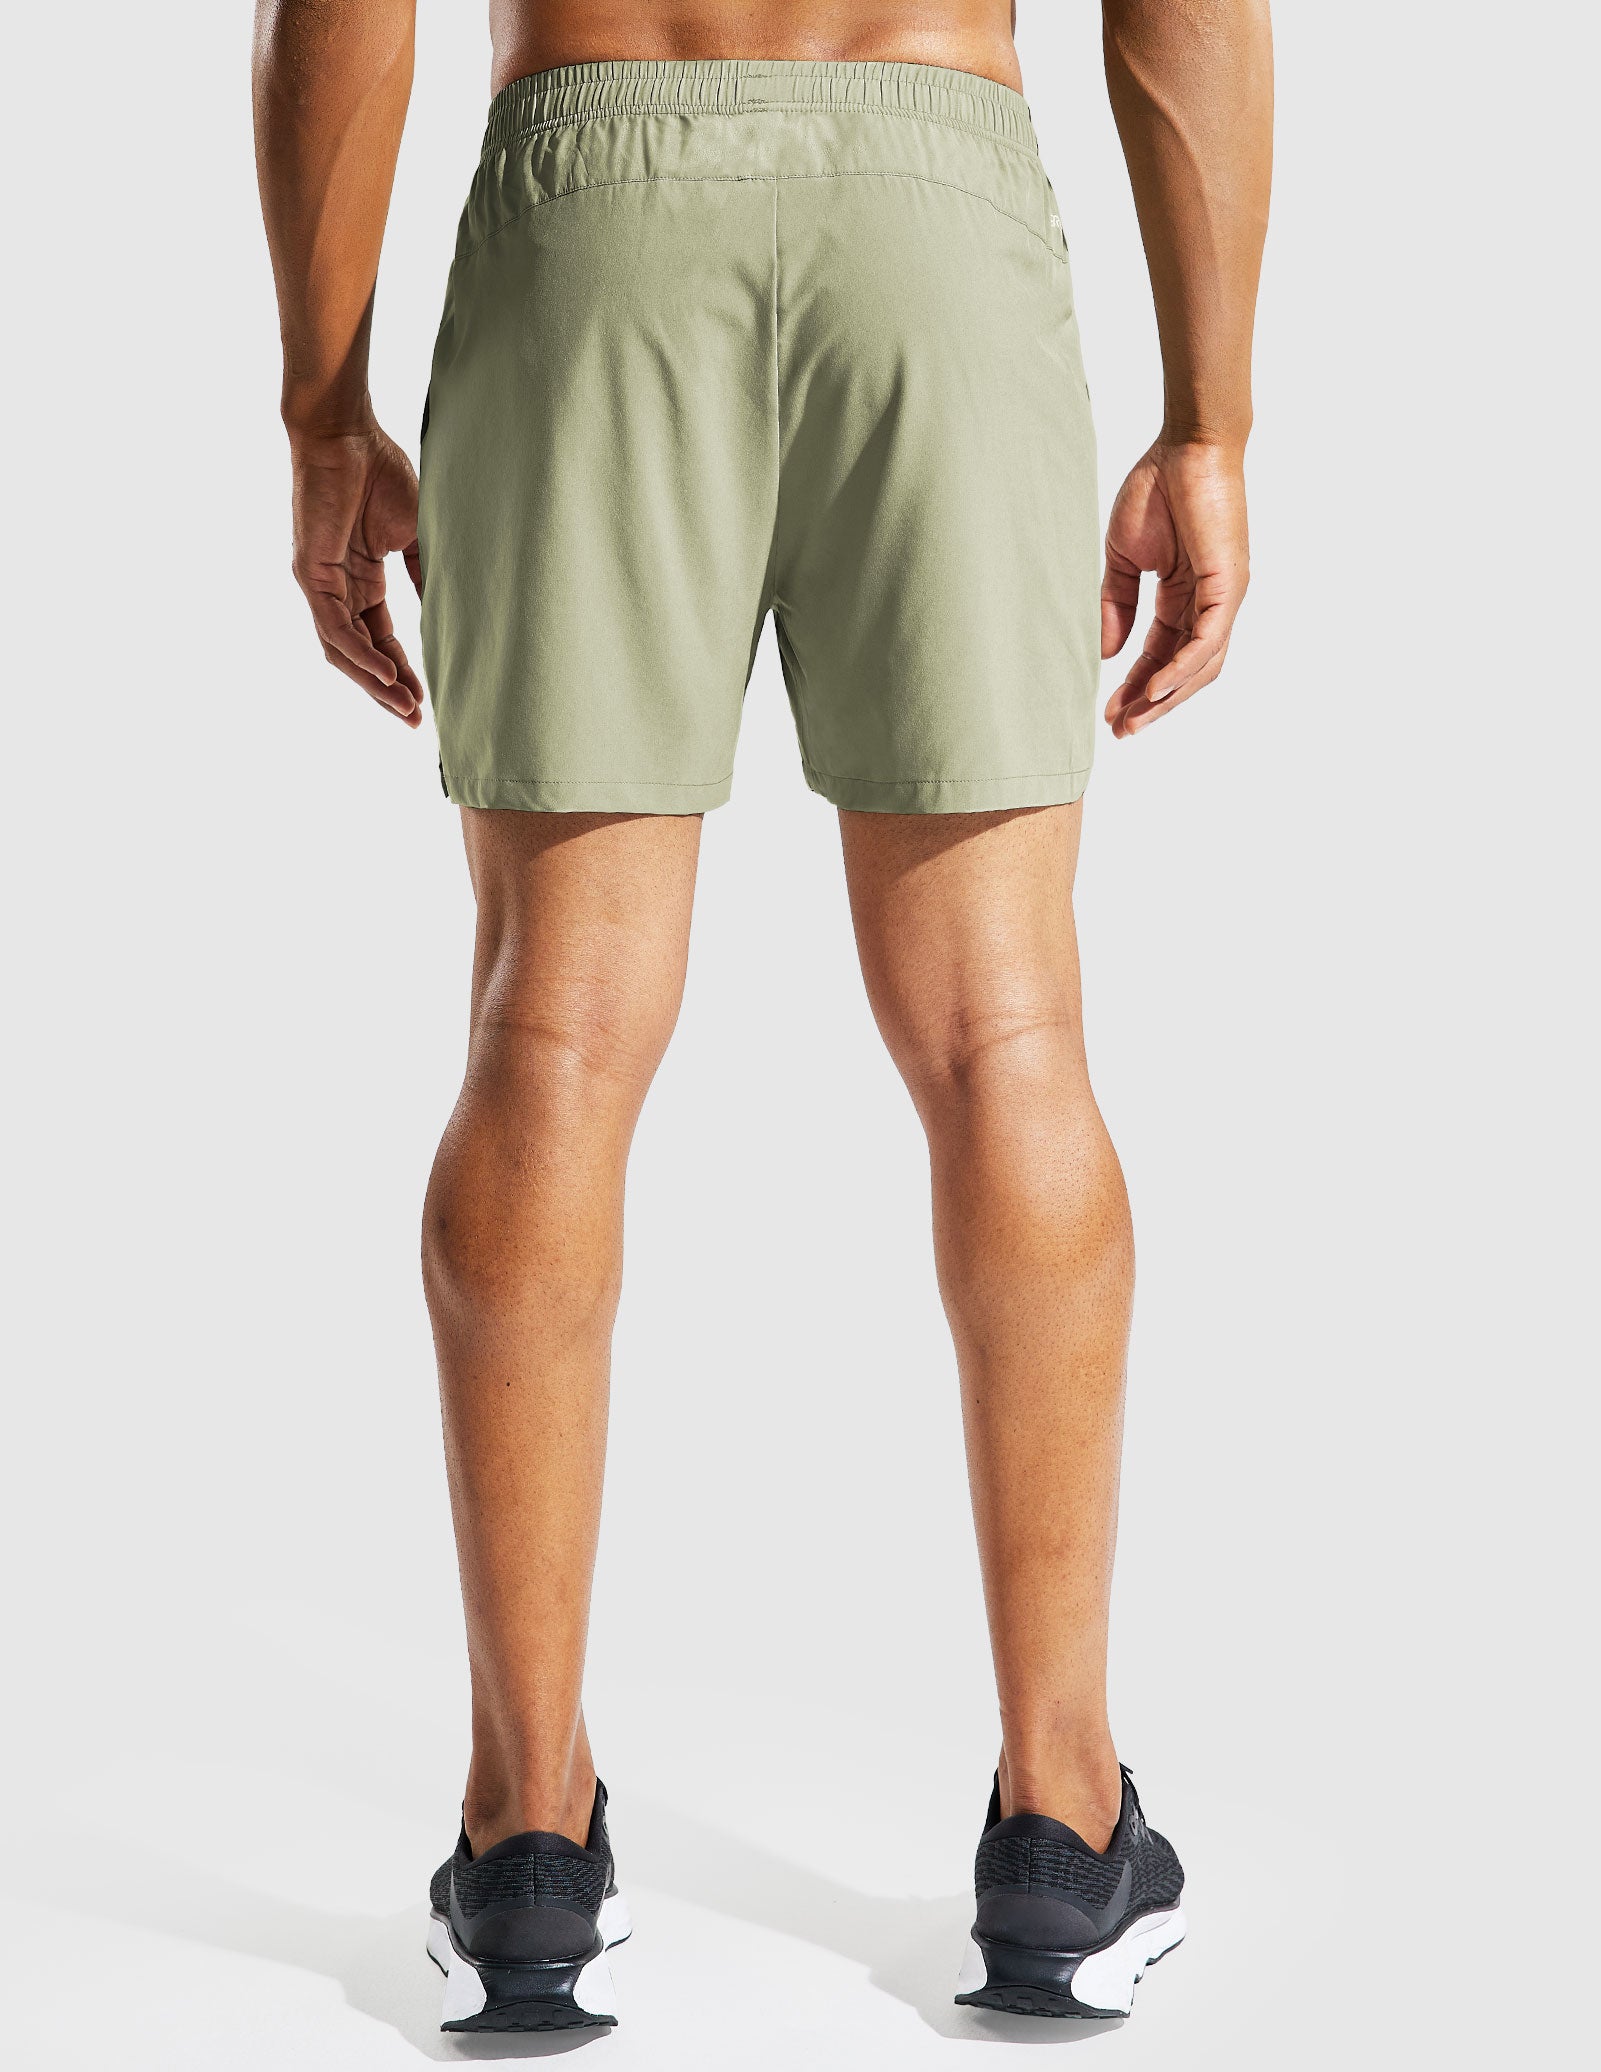 Men's Quick Dry Running Athletic Shorts with Pockets 5 Inch